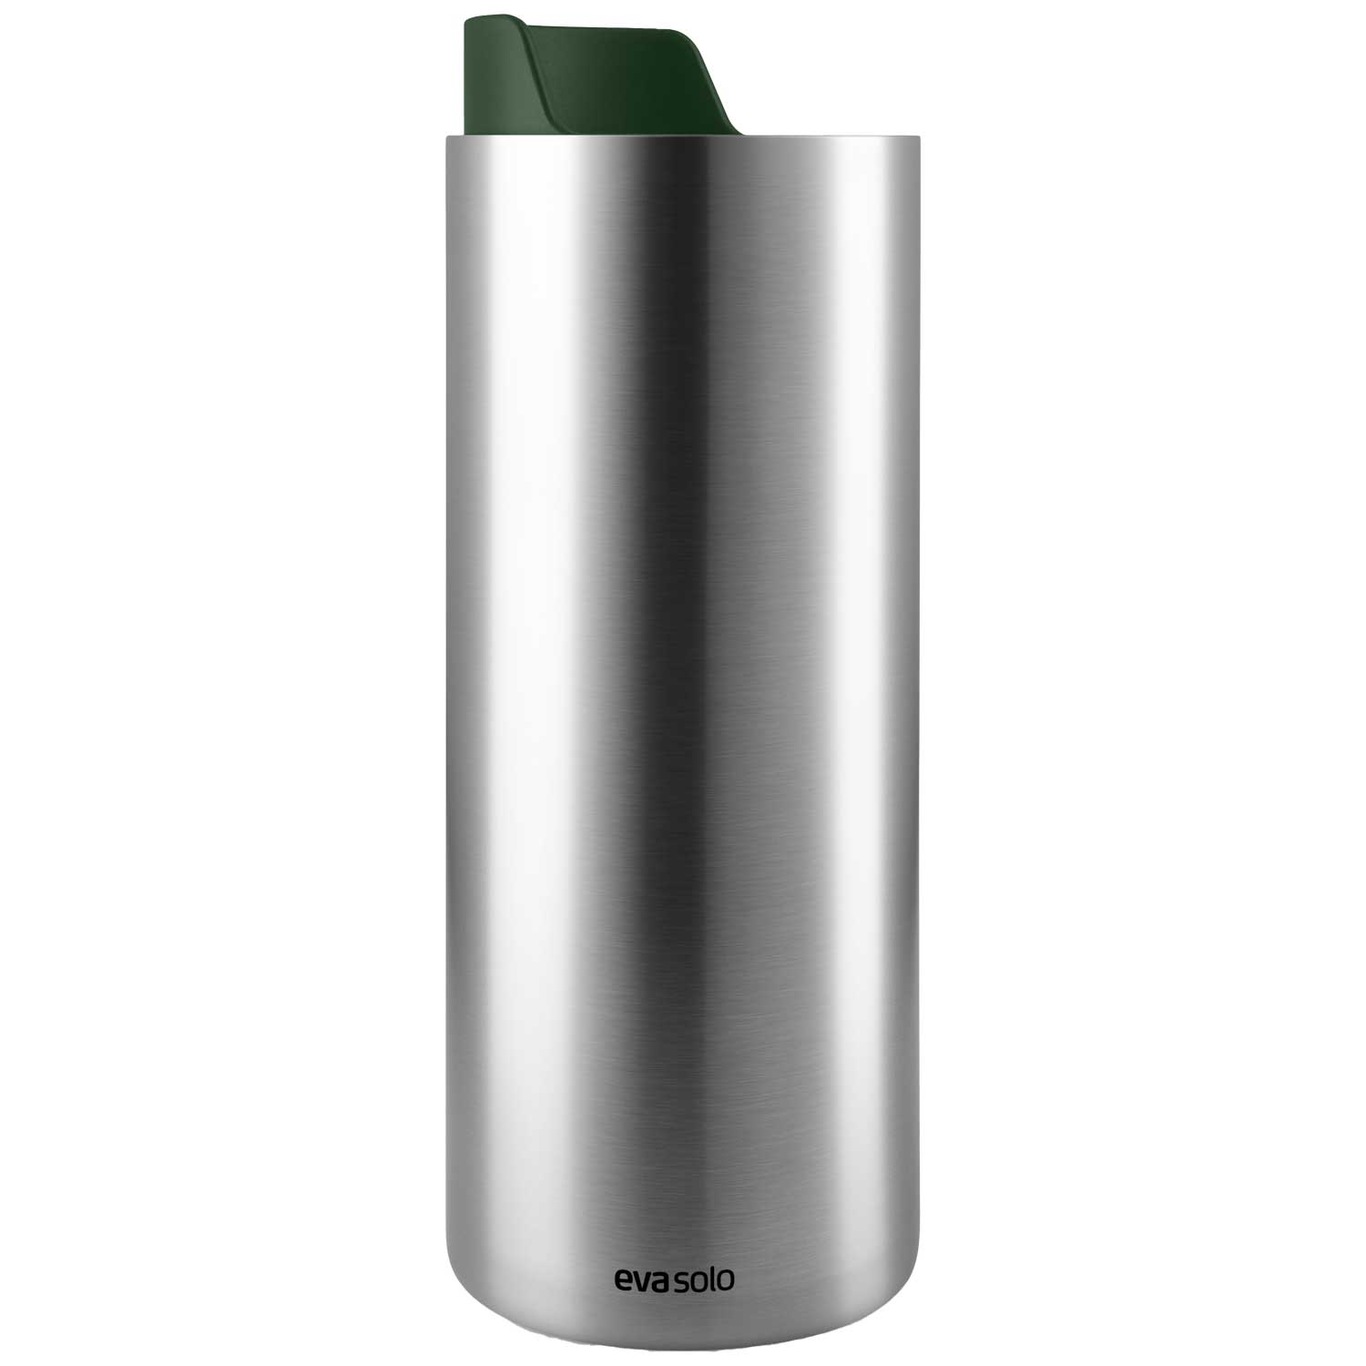 Urban To Go Recycled Thermobecher, Emerald Green